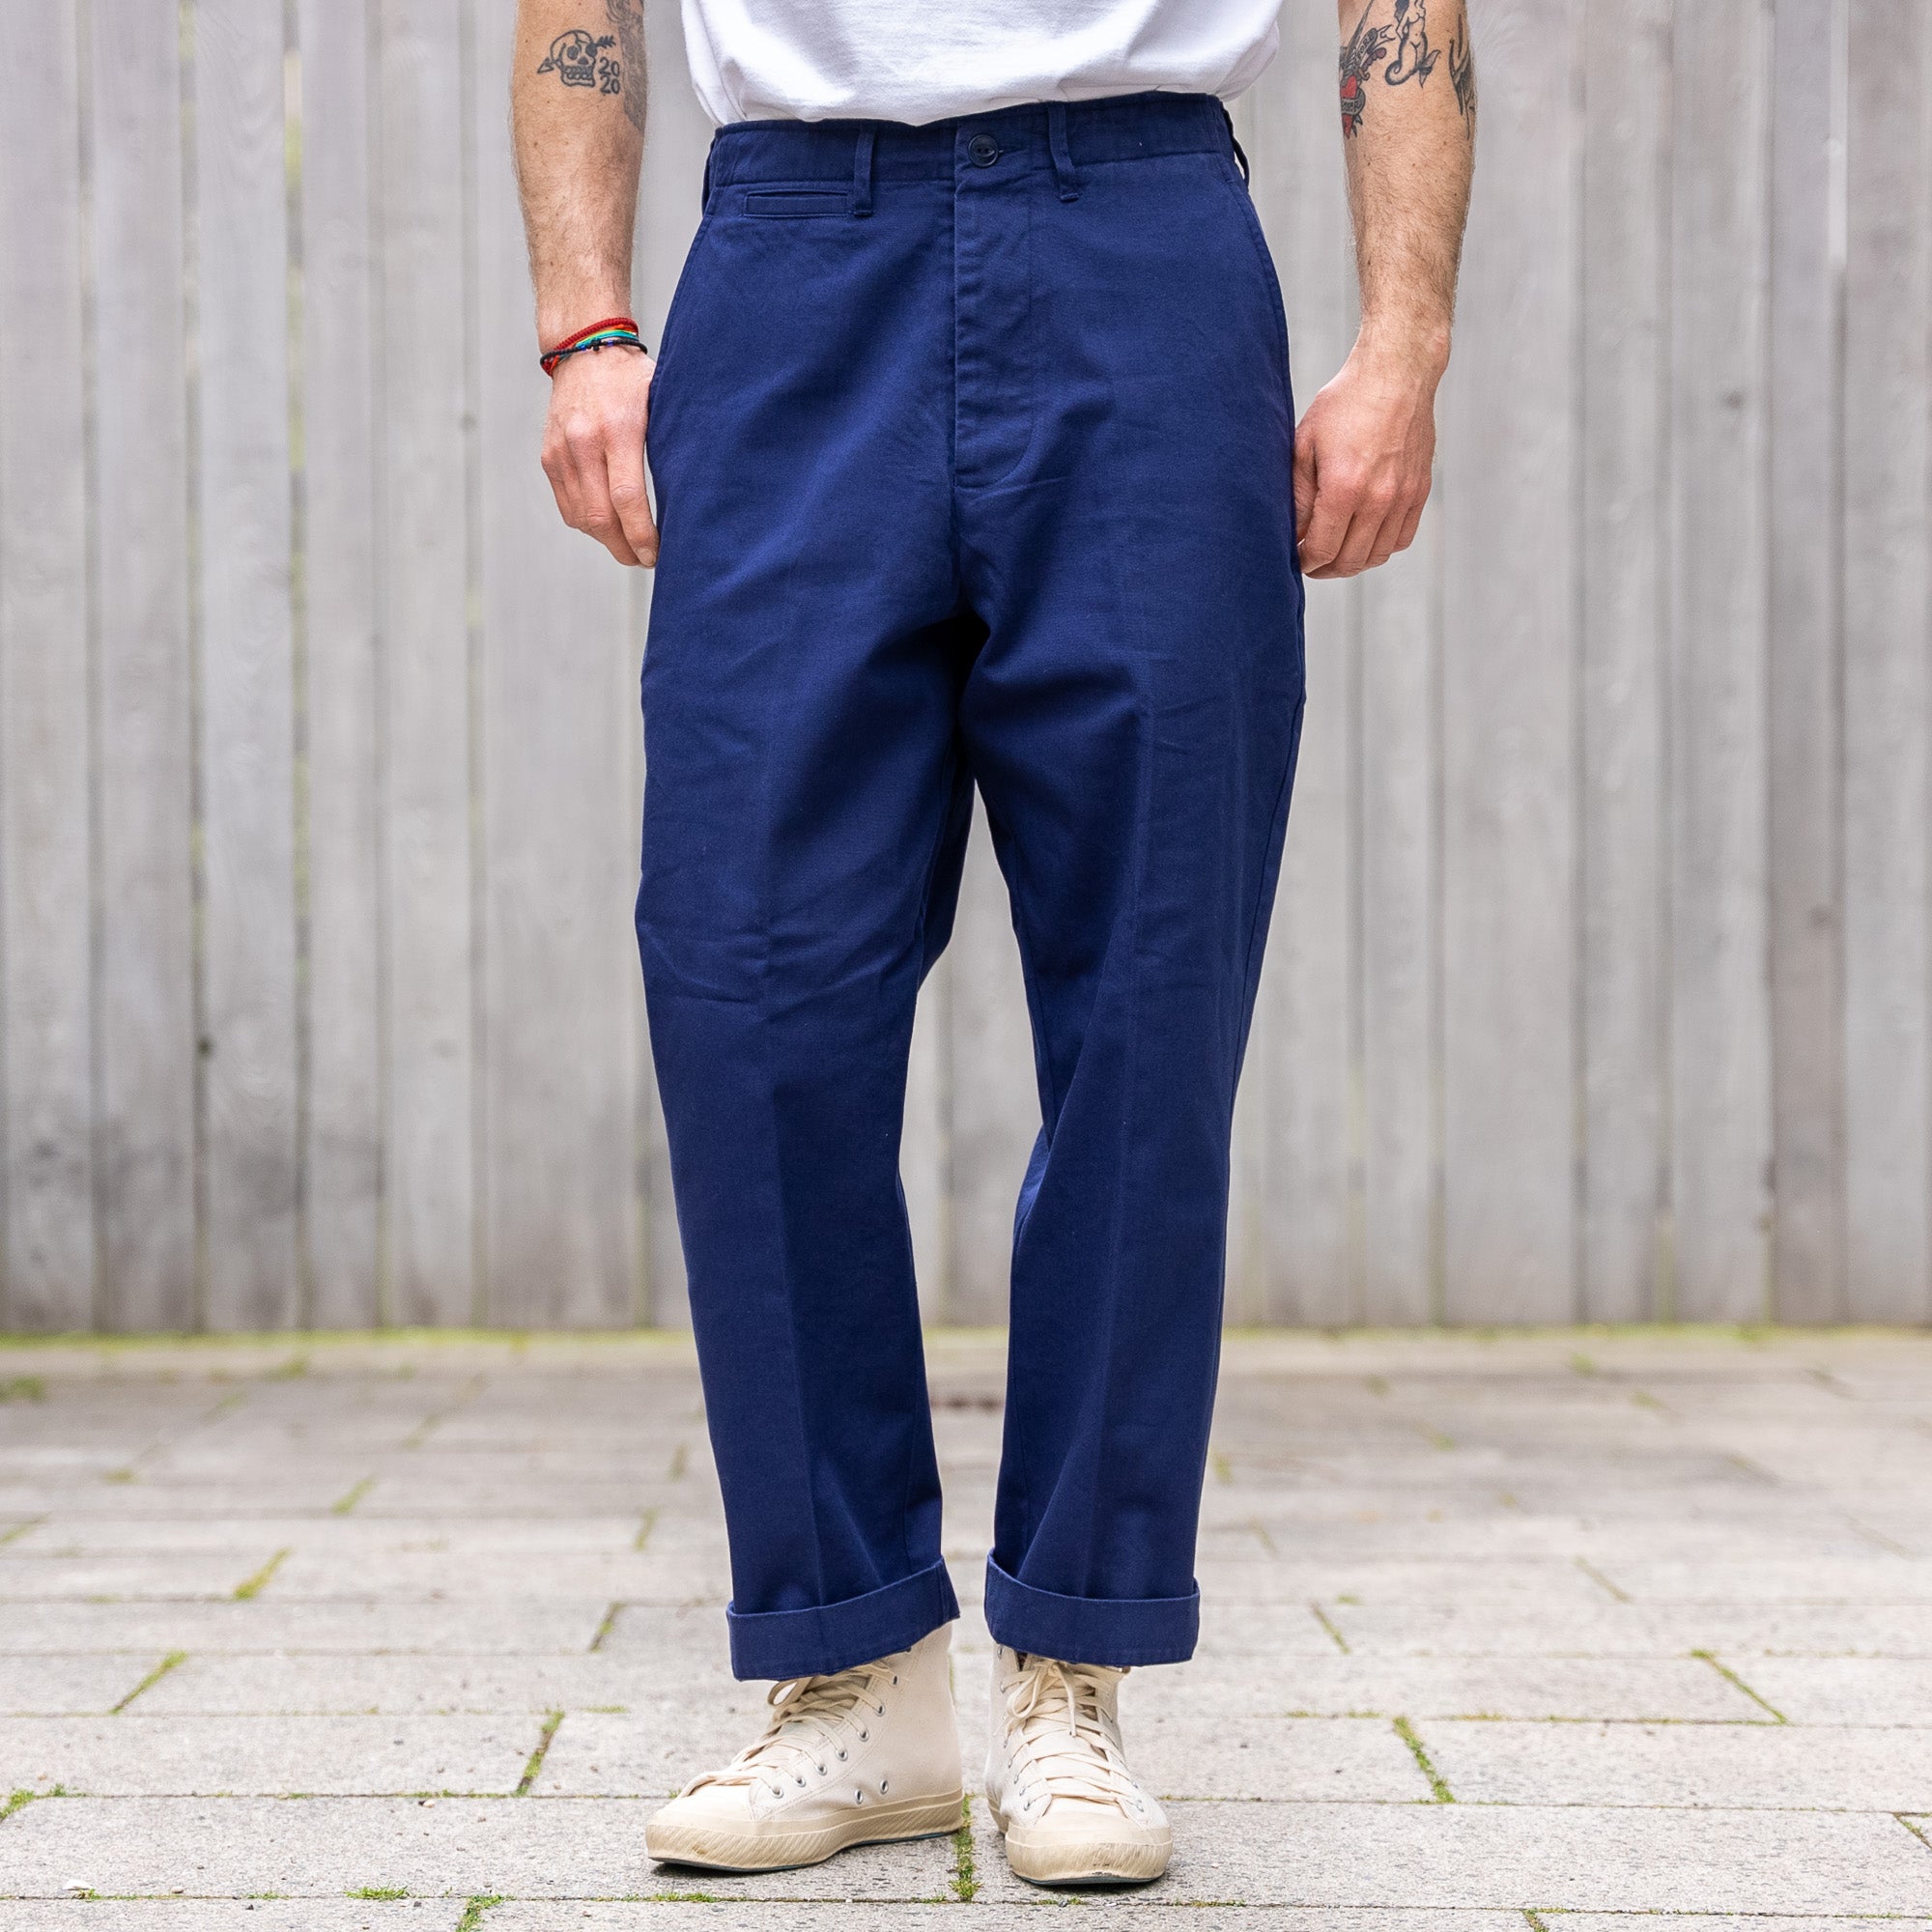 Merz b Schwanen Twill Pleat – / Ink Chino Blue Tapered Relaxed